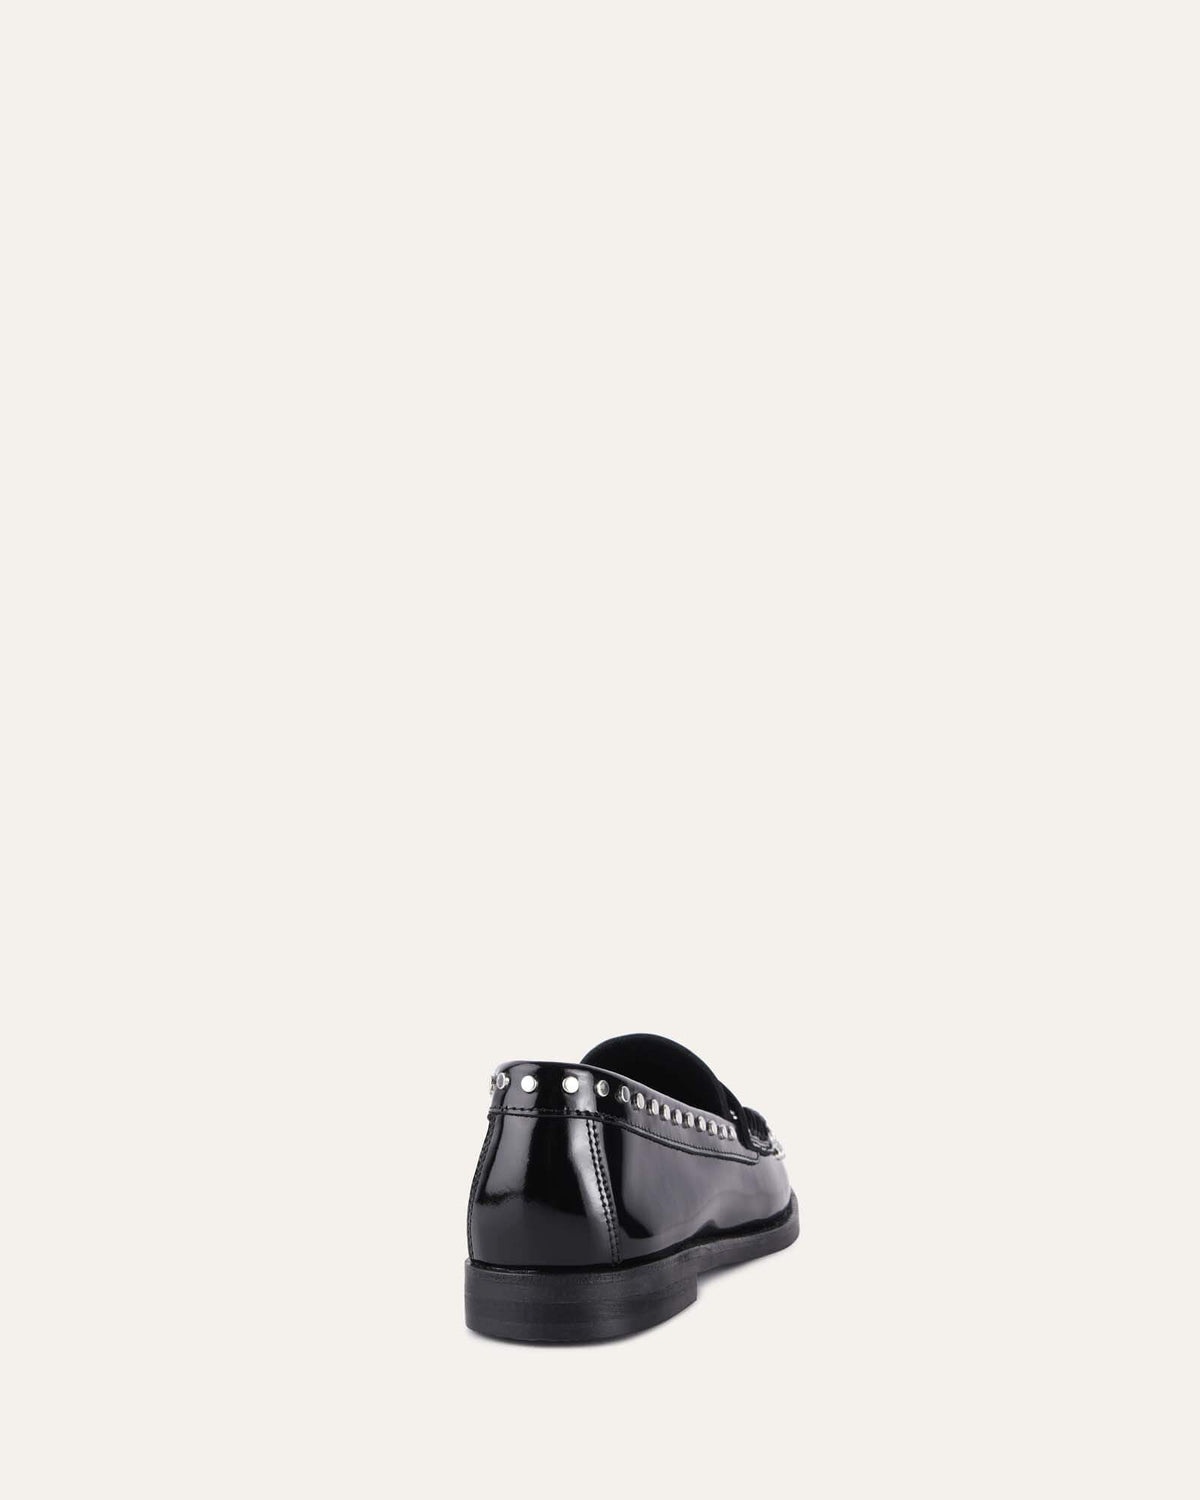 TEXAS LOAFERS BLACK LEATHER